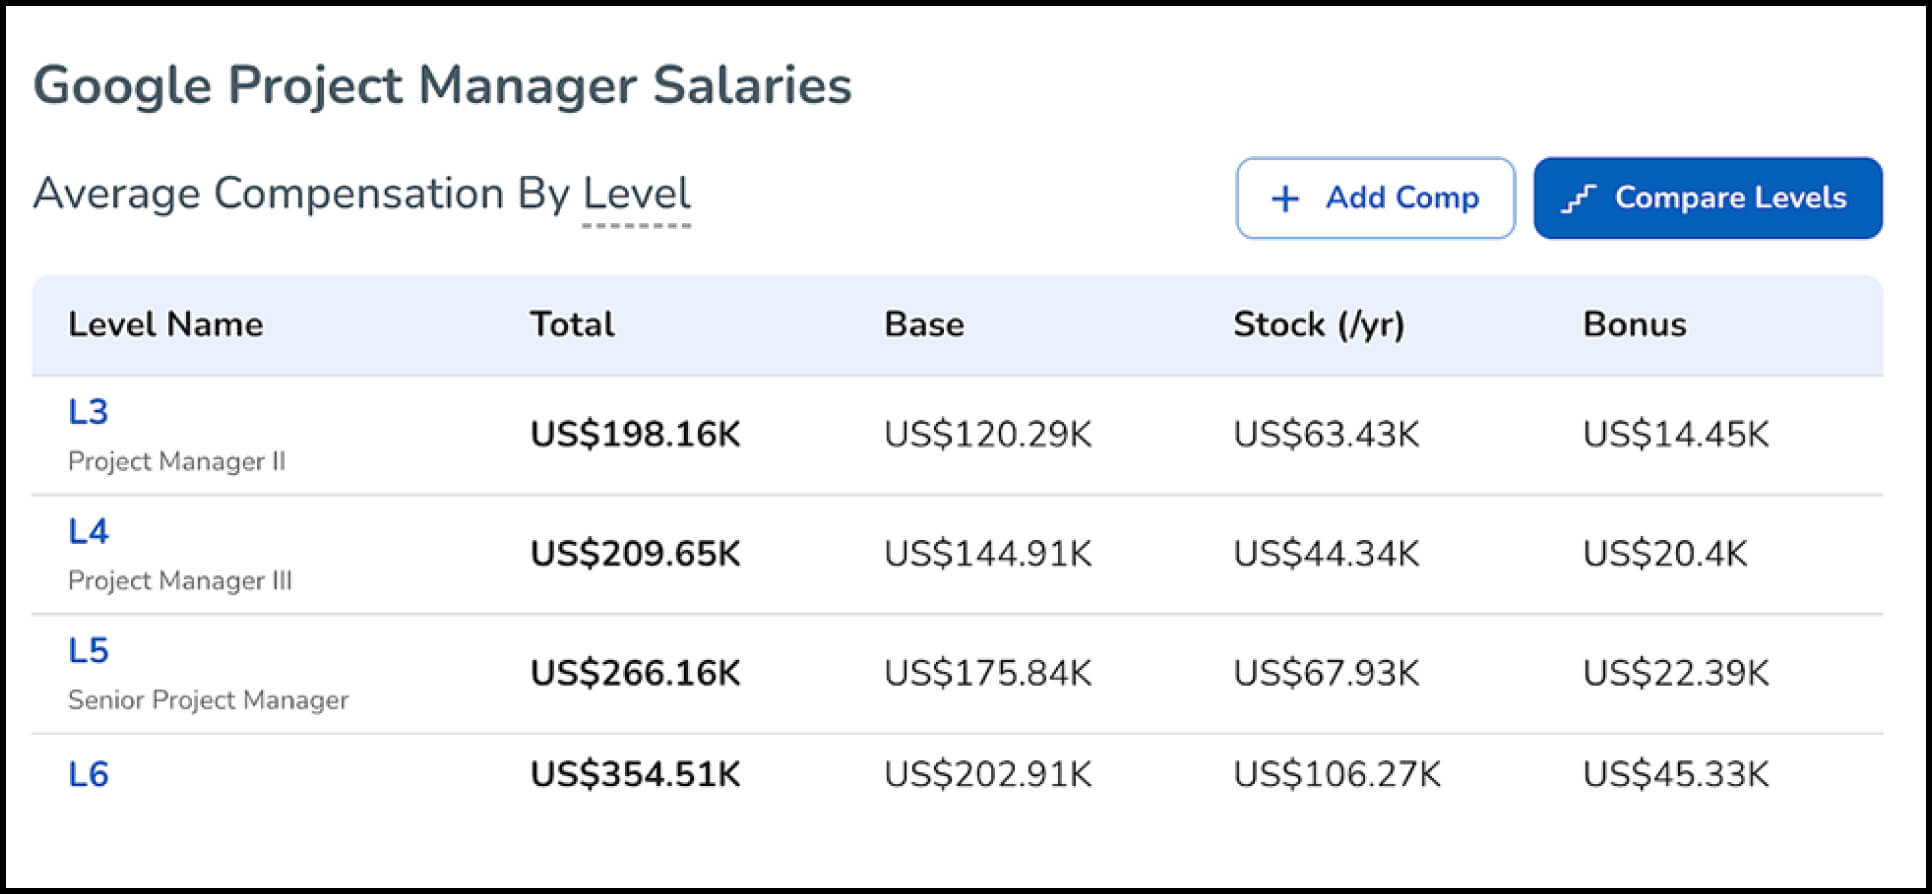 levels dot fyi website showing google project manager salaries at different levels